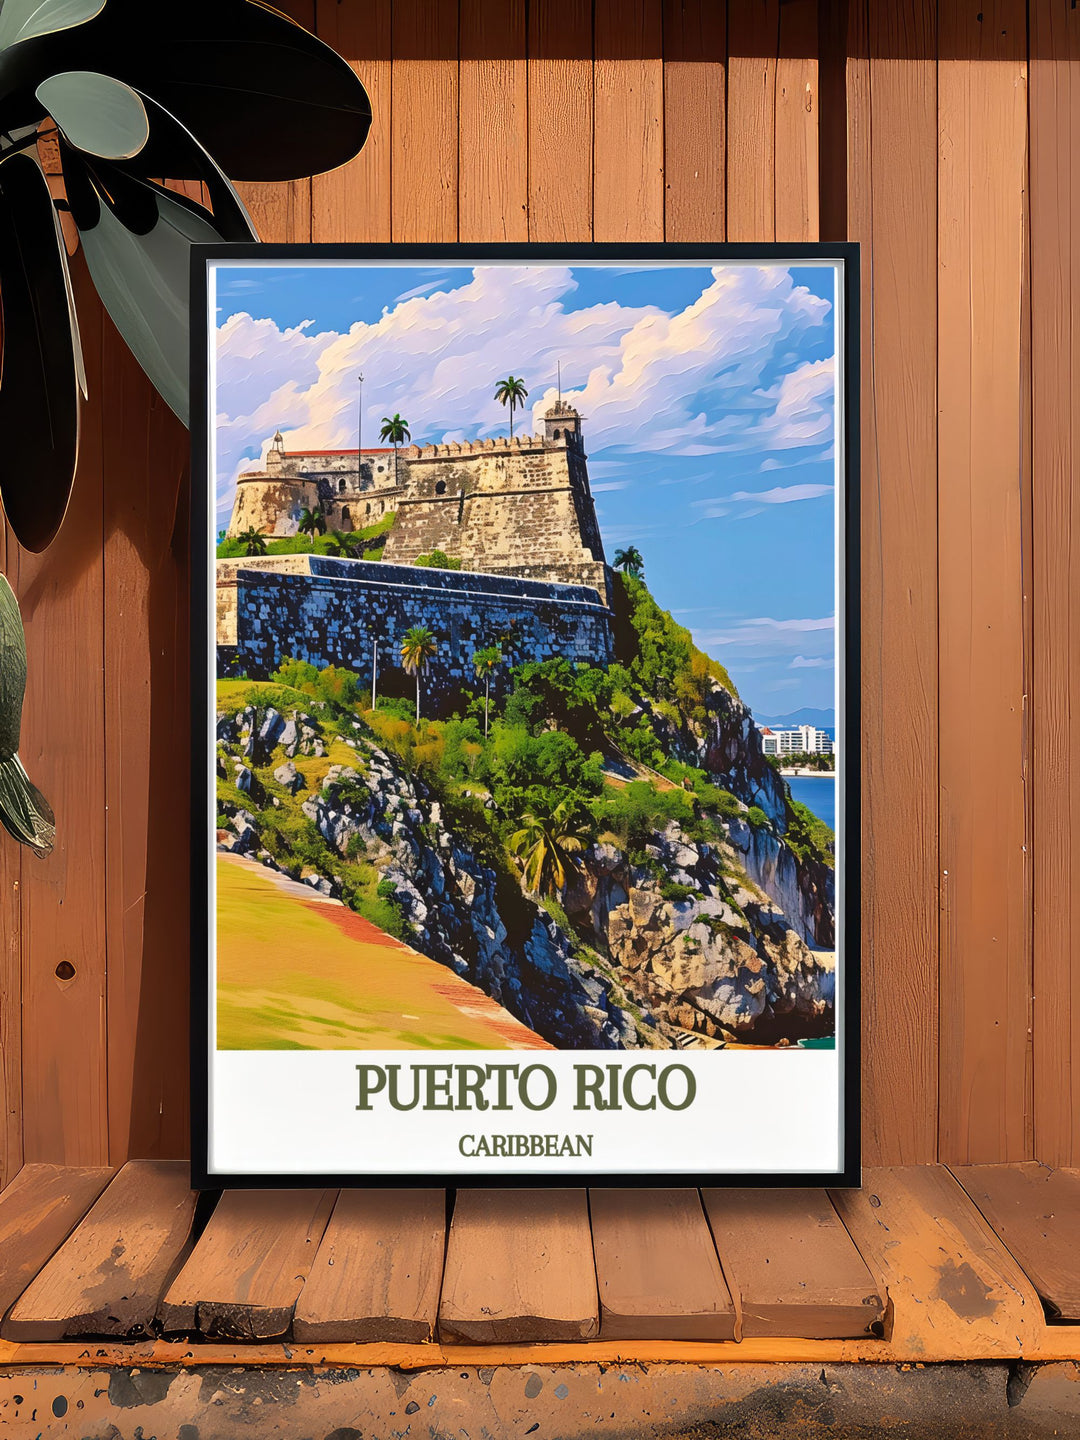 Elegant CARIBBEAN, Castillo San Felipe del Morro poster with a vintage design. Ideal for Arecibo photography lovers and those looking for personalized gifts. Adds a vibrant touch to home decor with its striking color palette.